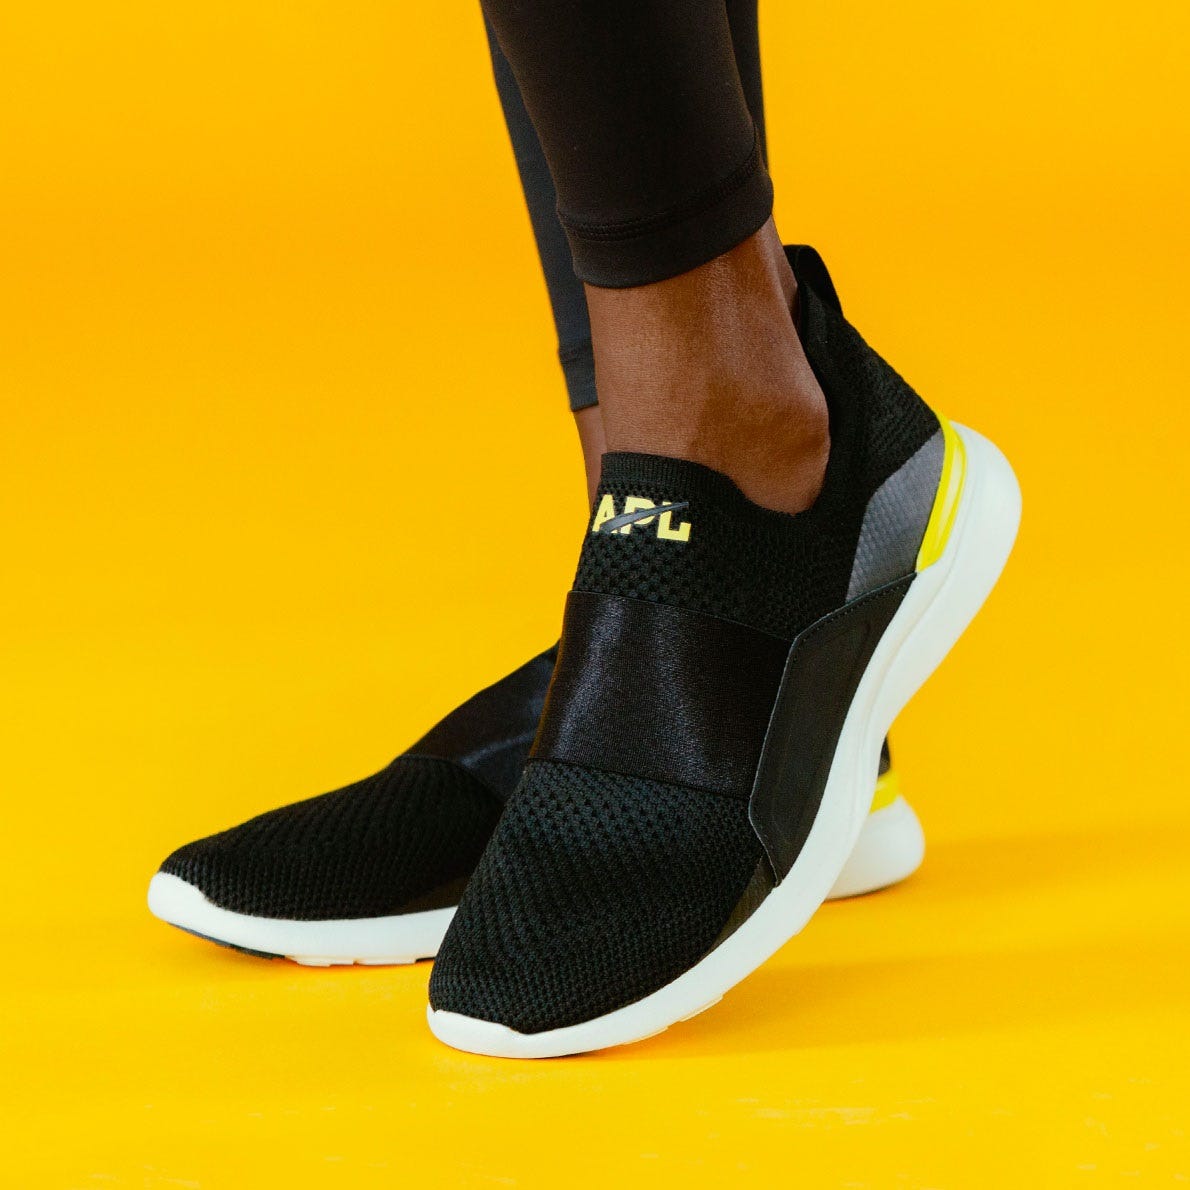 APL + APL x SoulCycle Slip On Shoe â Womens